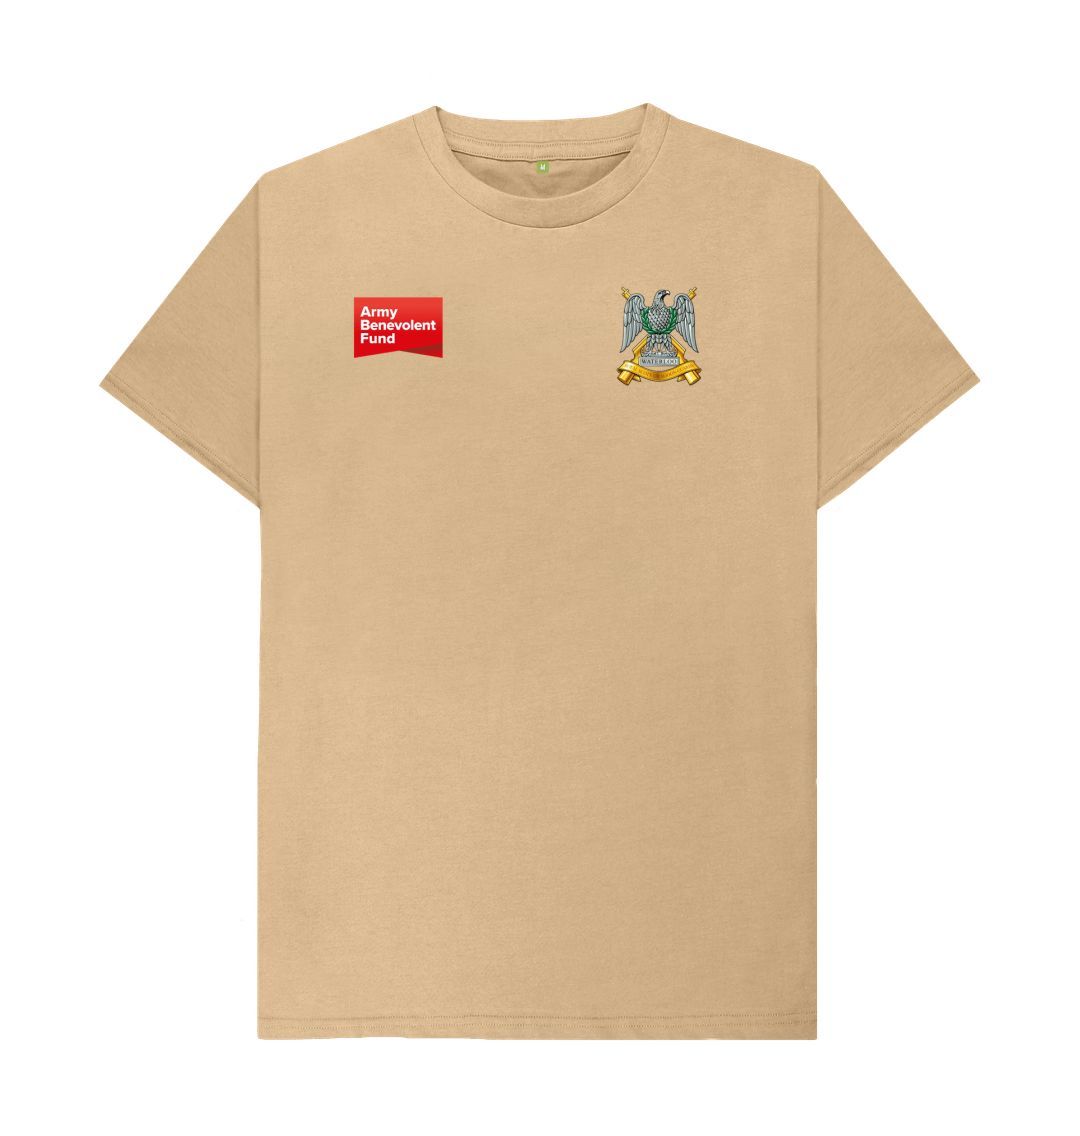 The Royal Scots Dragoon Guards Unisex T-shirt - Army Benevolent Fund